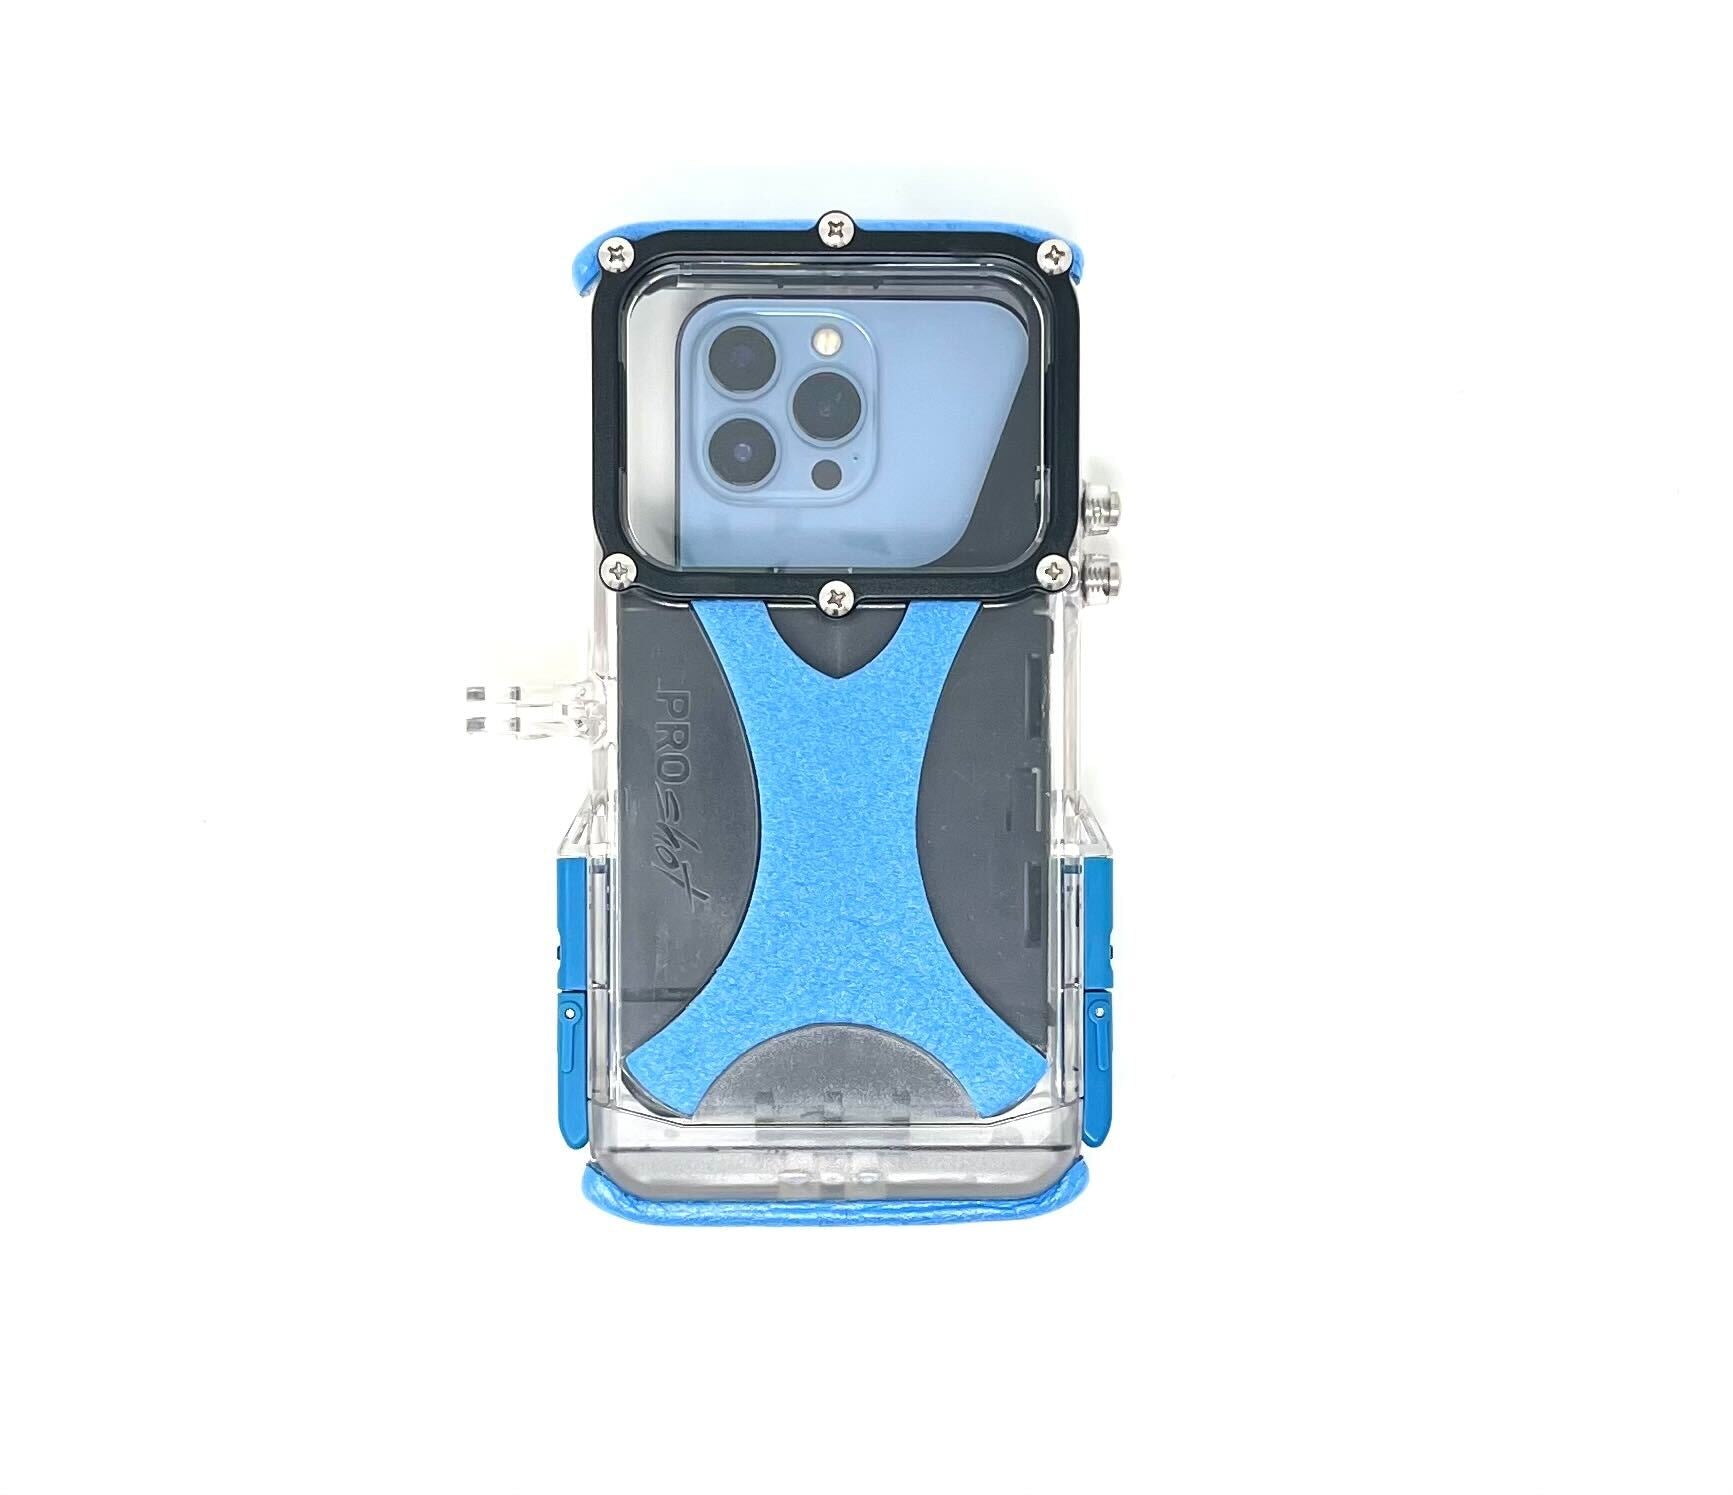 Waterproof PRO Case for iPhone Xs Max - Hitcase